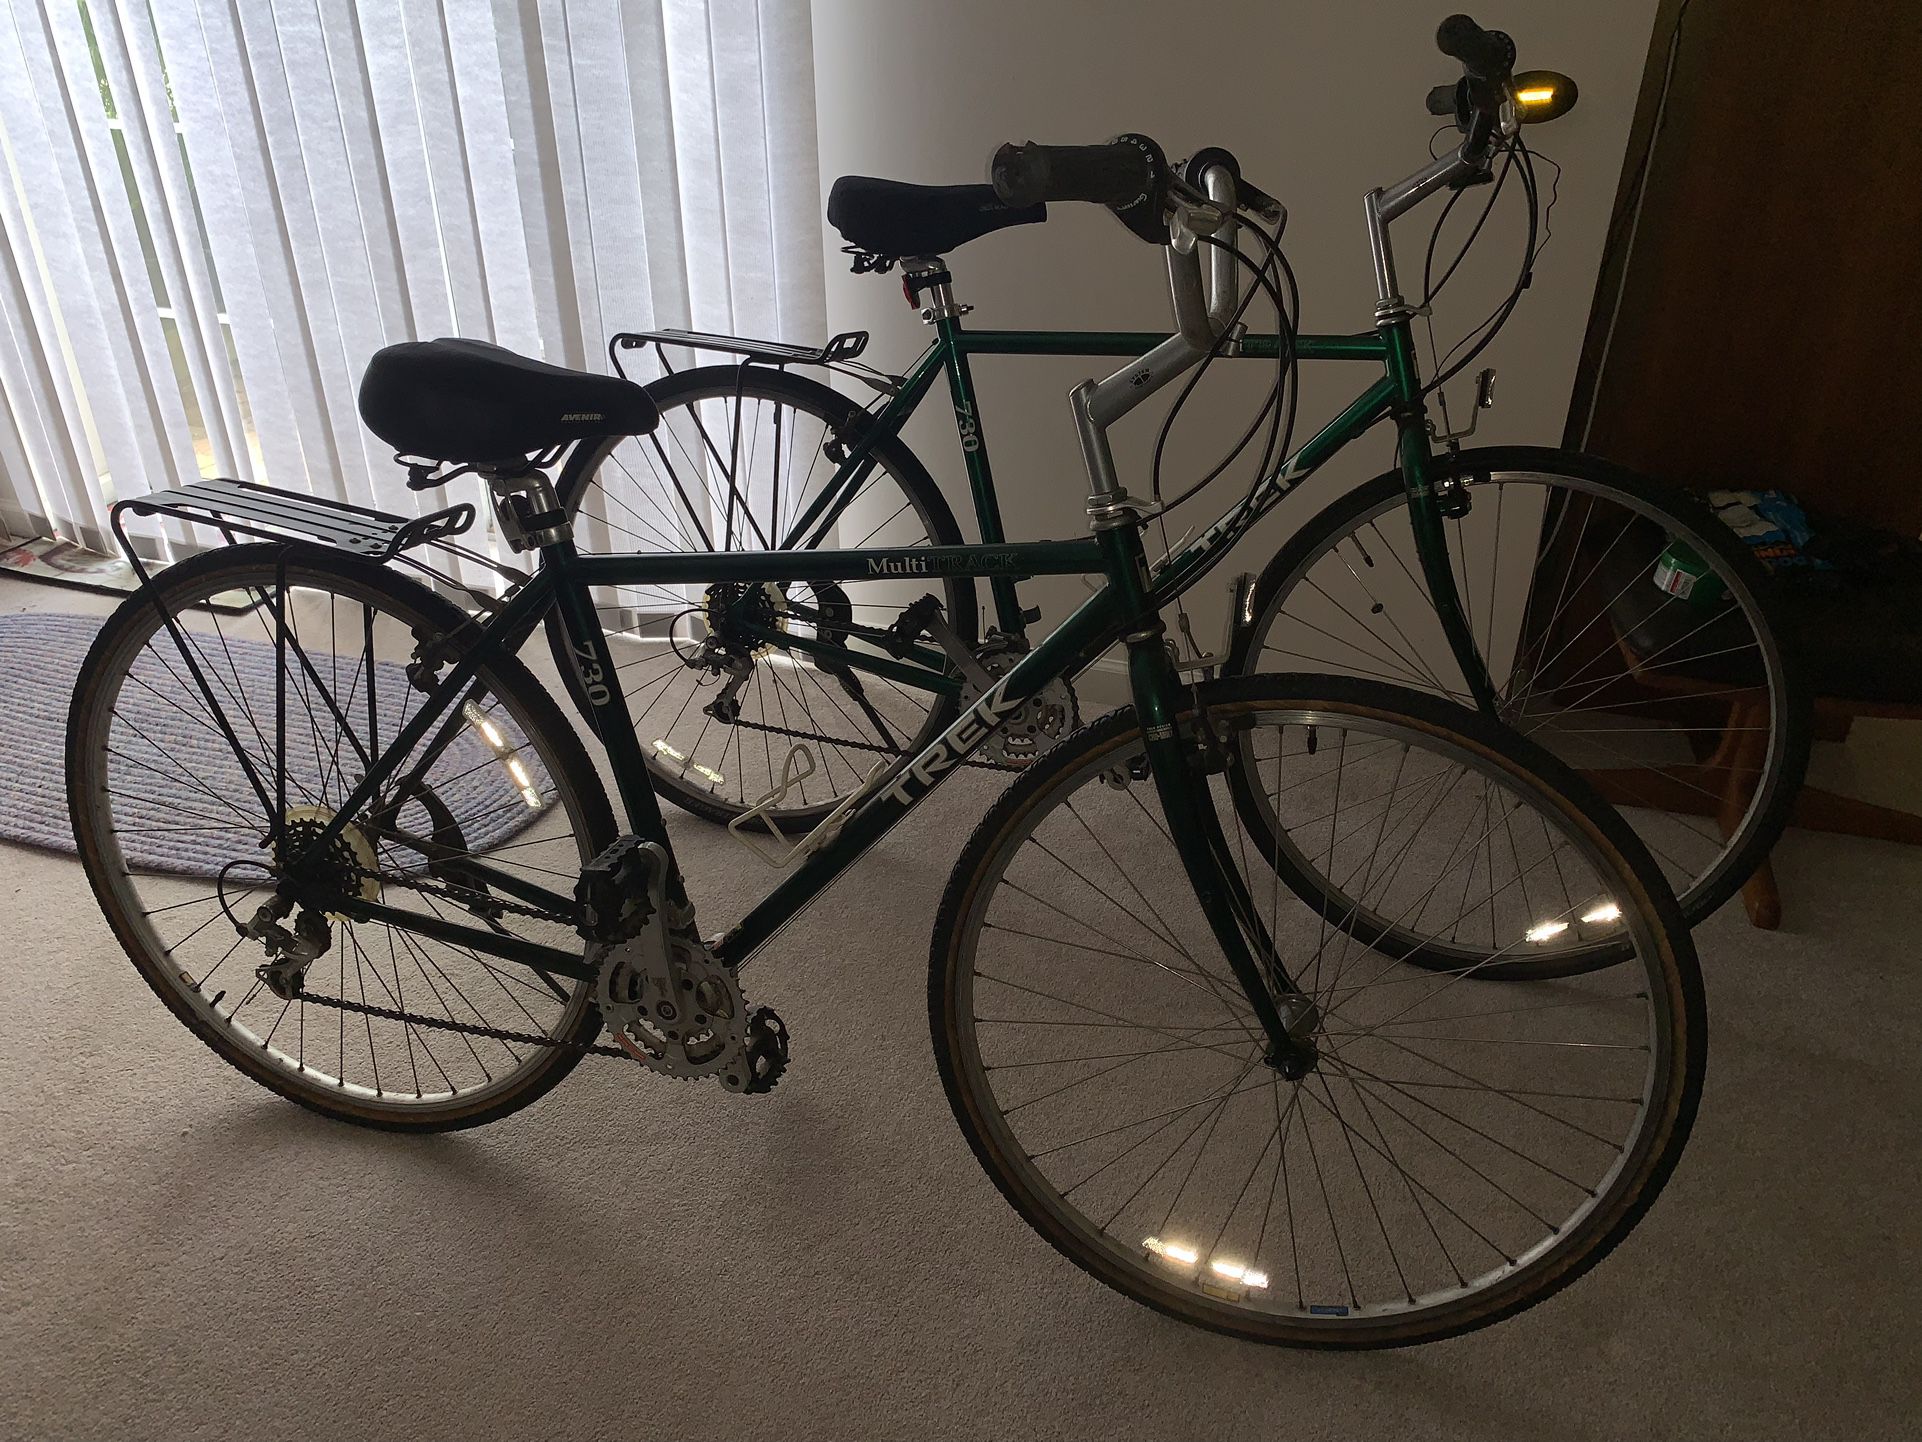 2 Trek bikes were used by husband &wife*will sell separately $250 each